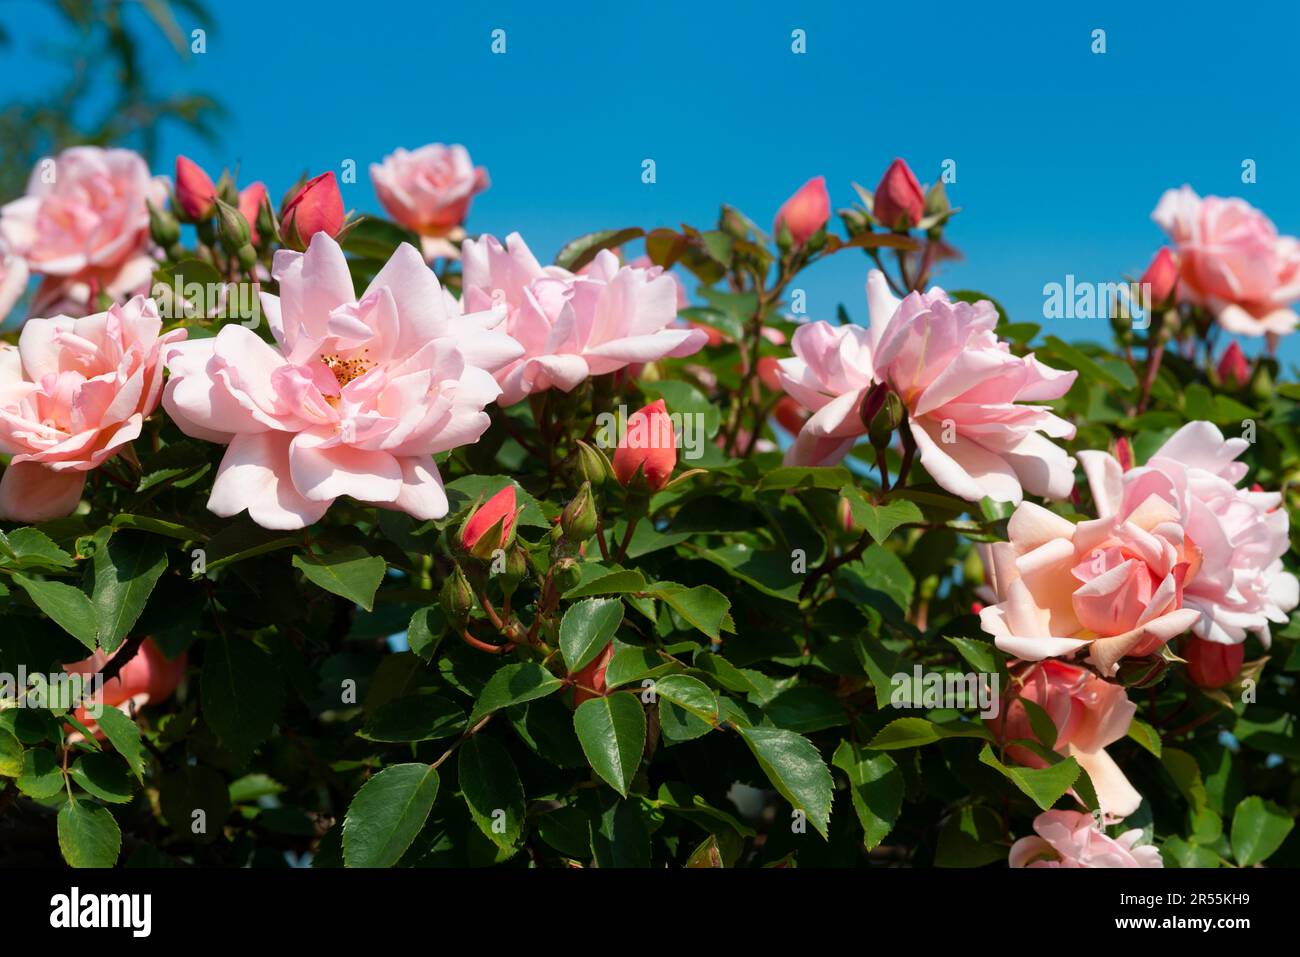 Flowers of a Pink Roses Background Sky Stock Photo